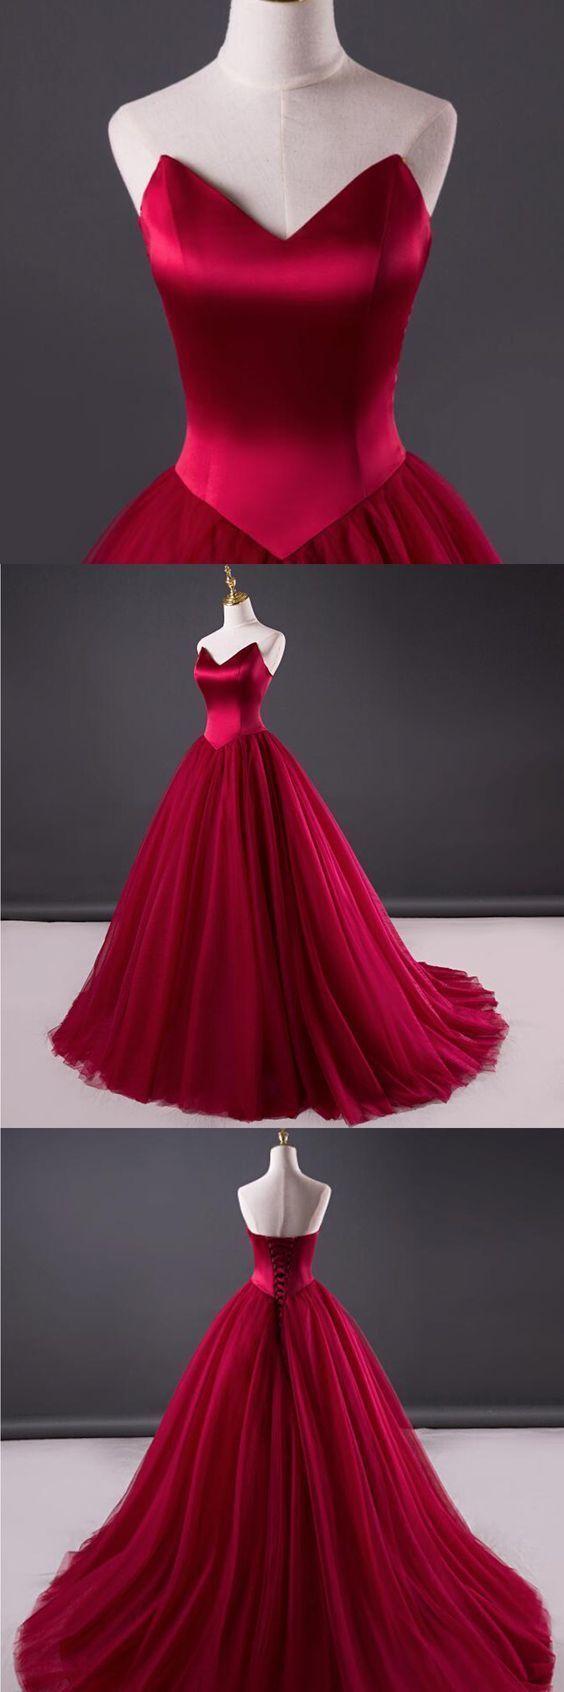 Mariage - Charming Sweetheart A-Line Prom Dresses,Long Prom Dresses,Cheap Prom Dresses, Evening Dress Prom Gowns, Formal Women Dress,Prom Dress,112601